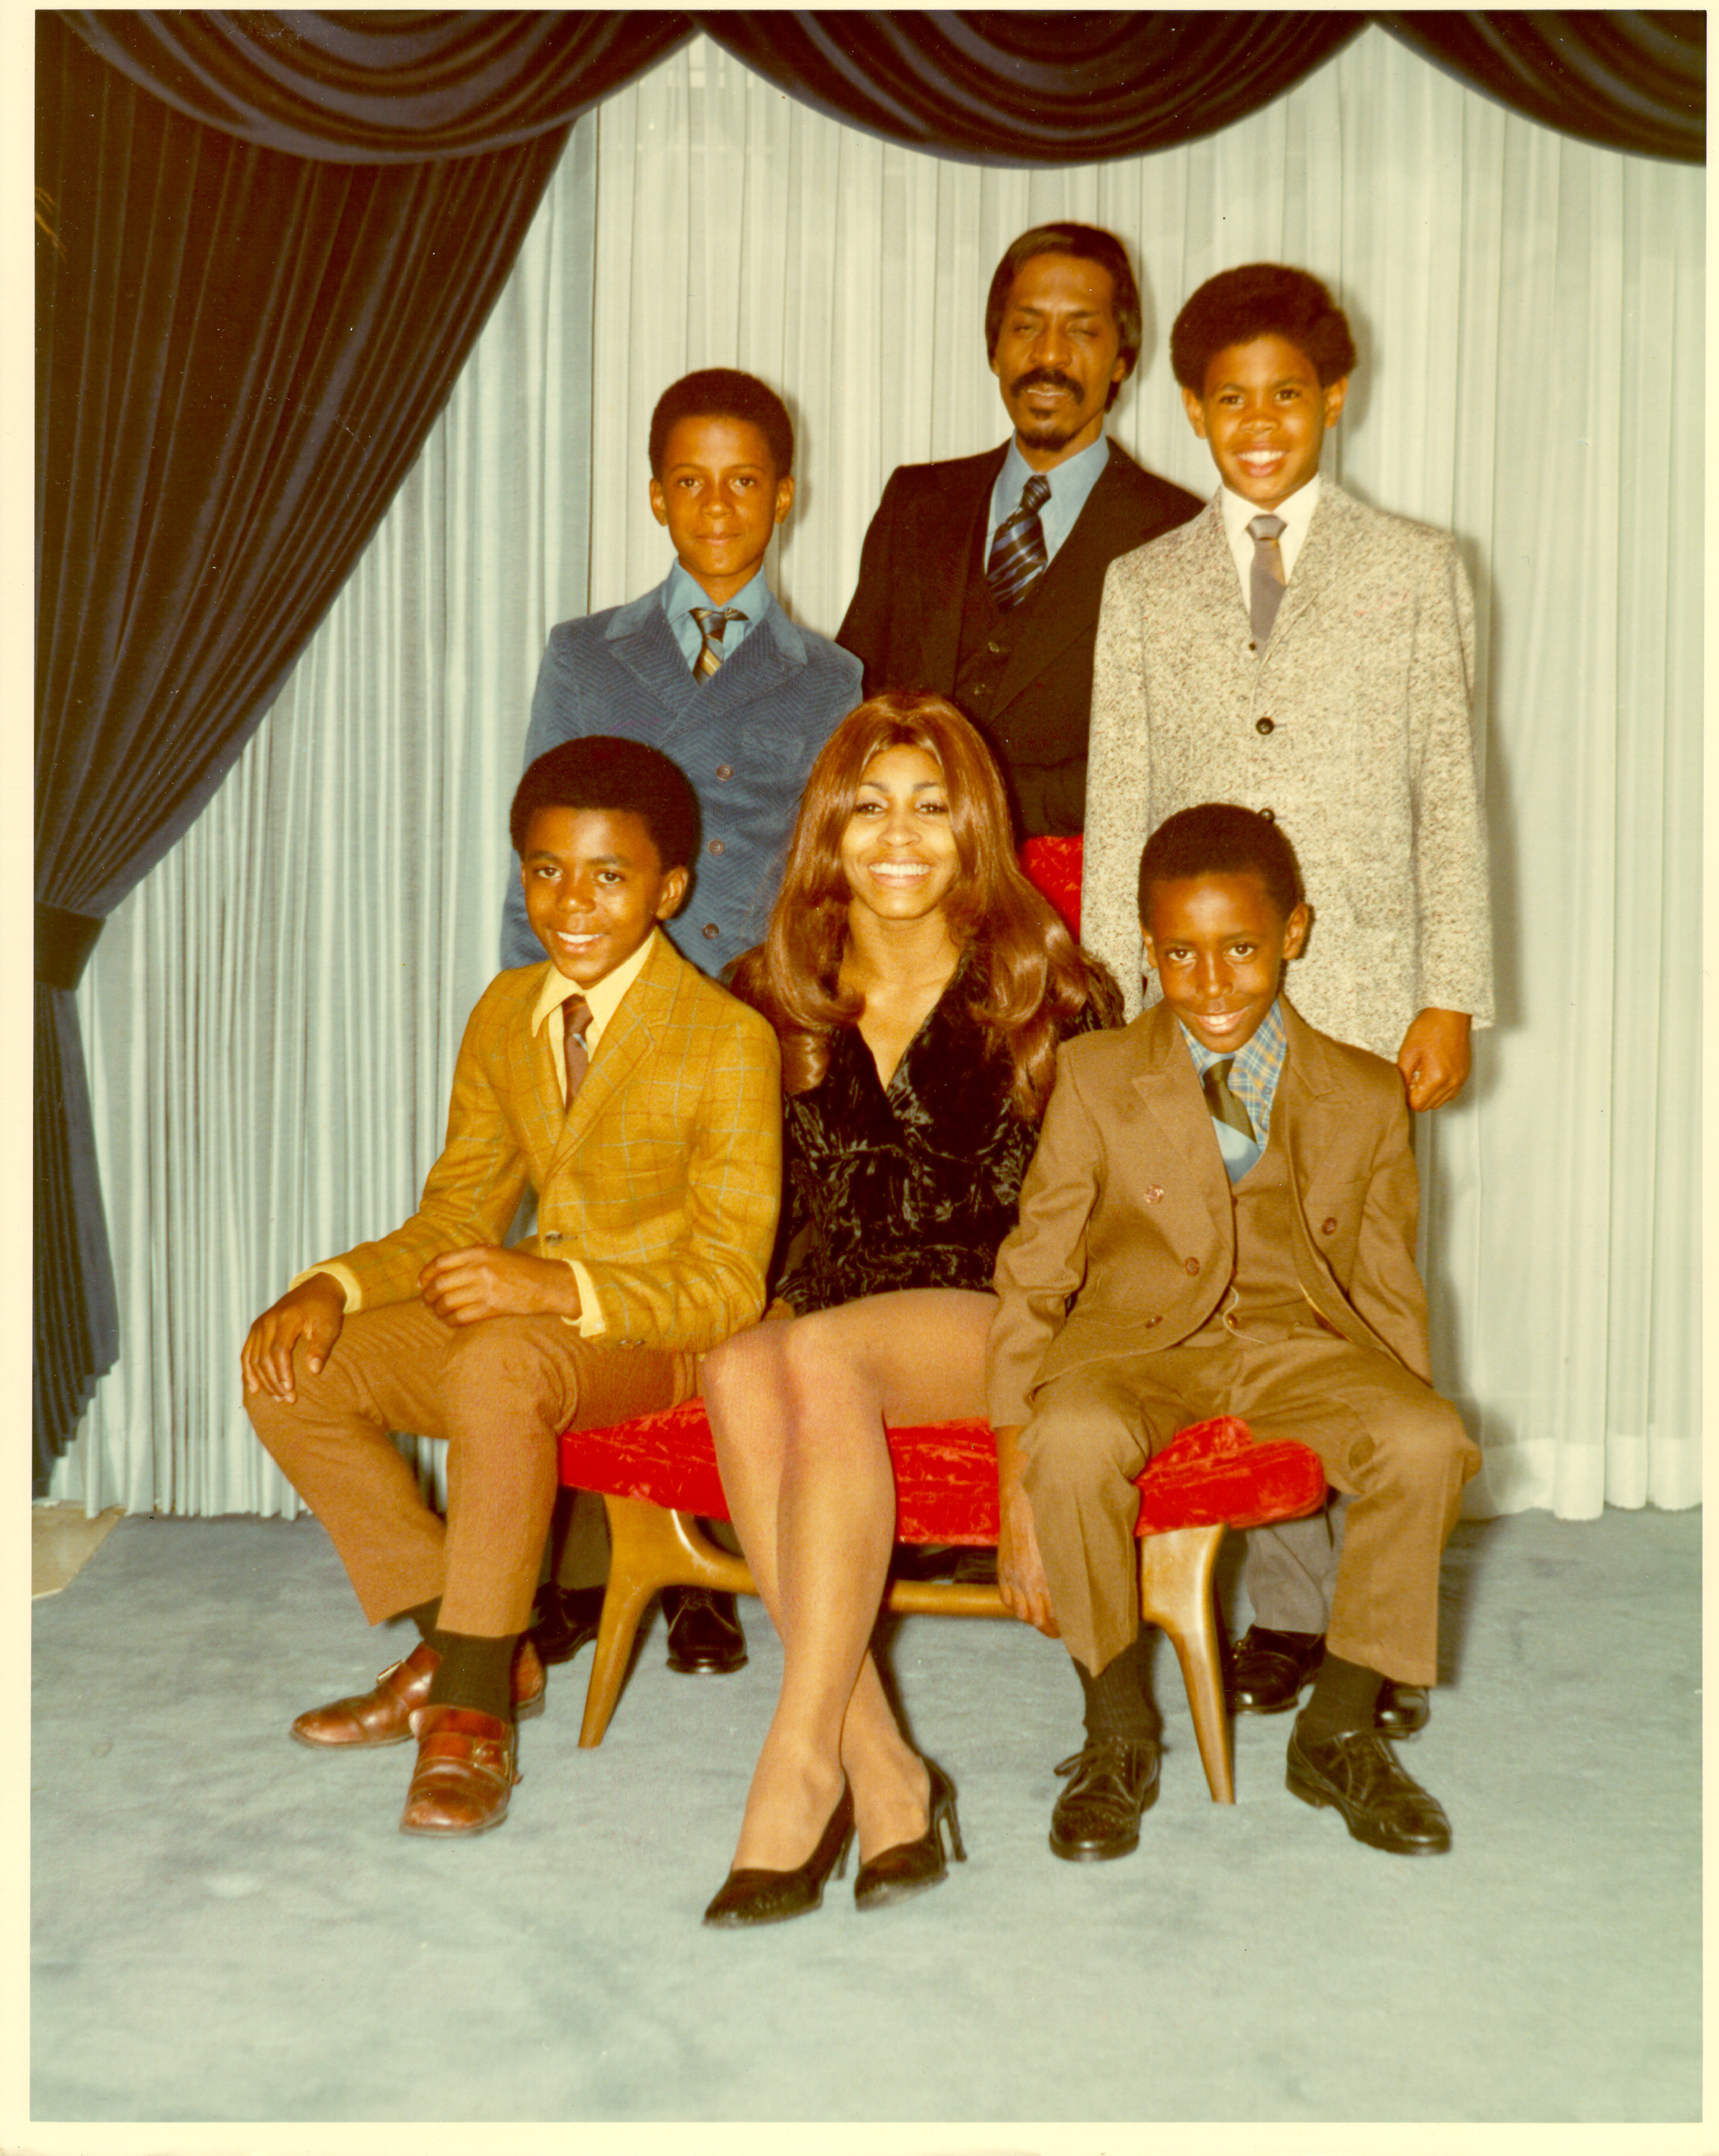 Ike & Tina Turner pose for a portrait with their son and step-sons on January 1, 1972 | Source: Getty Images